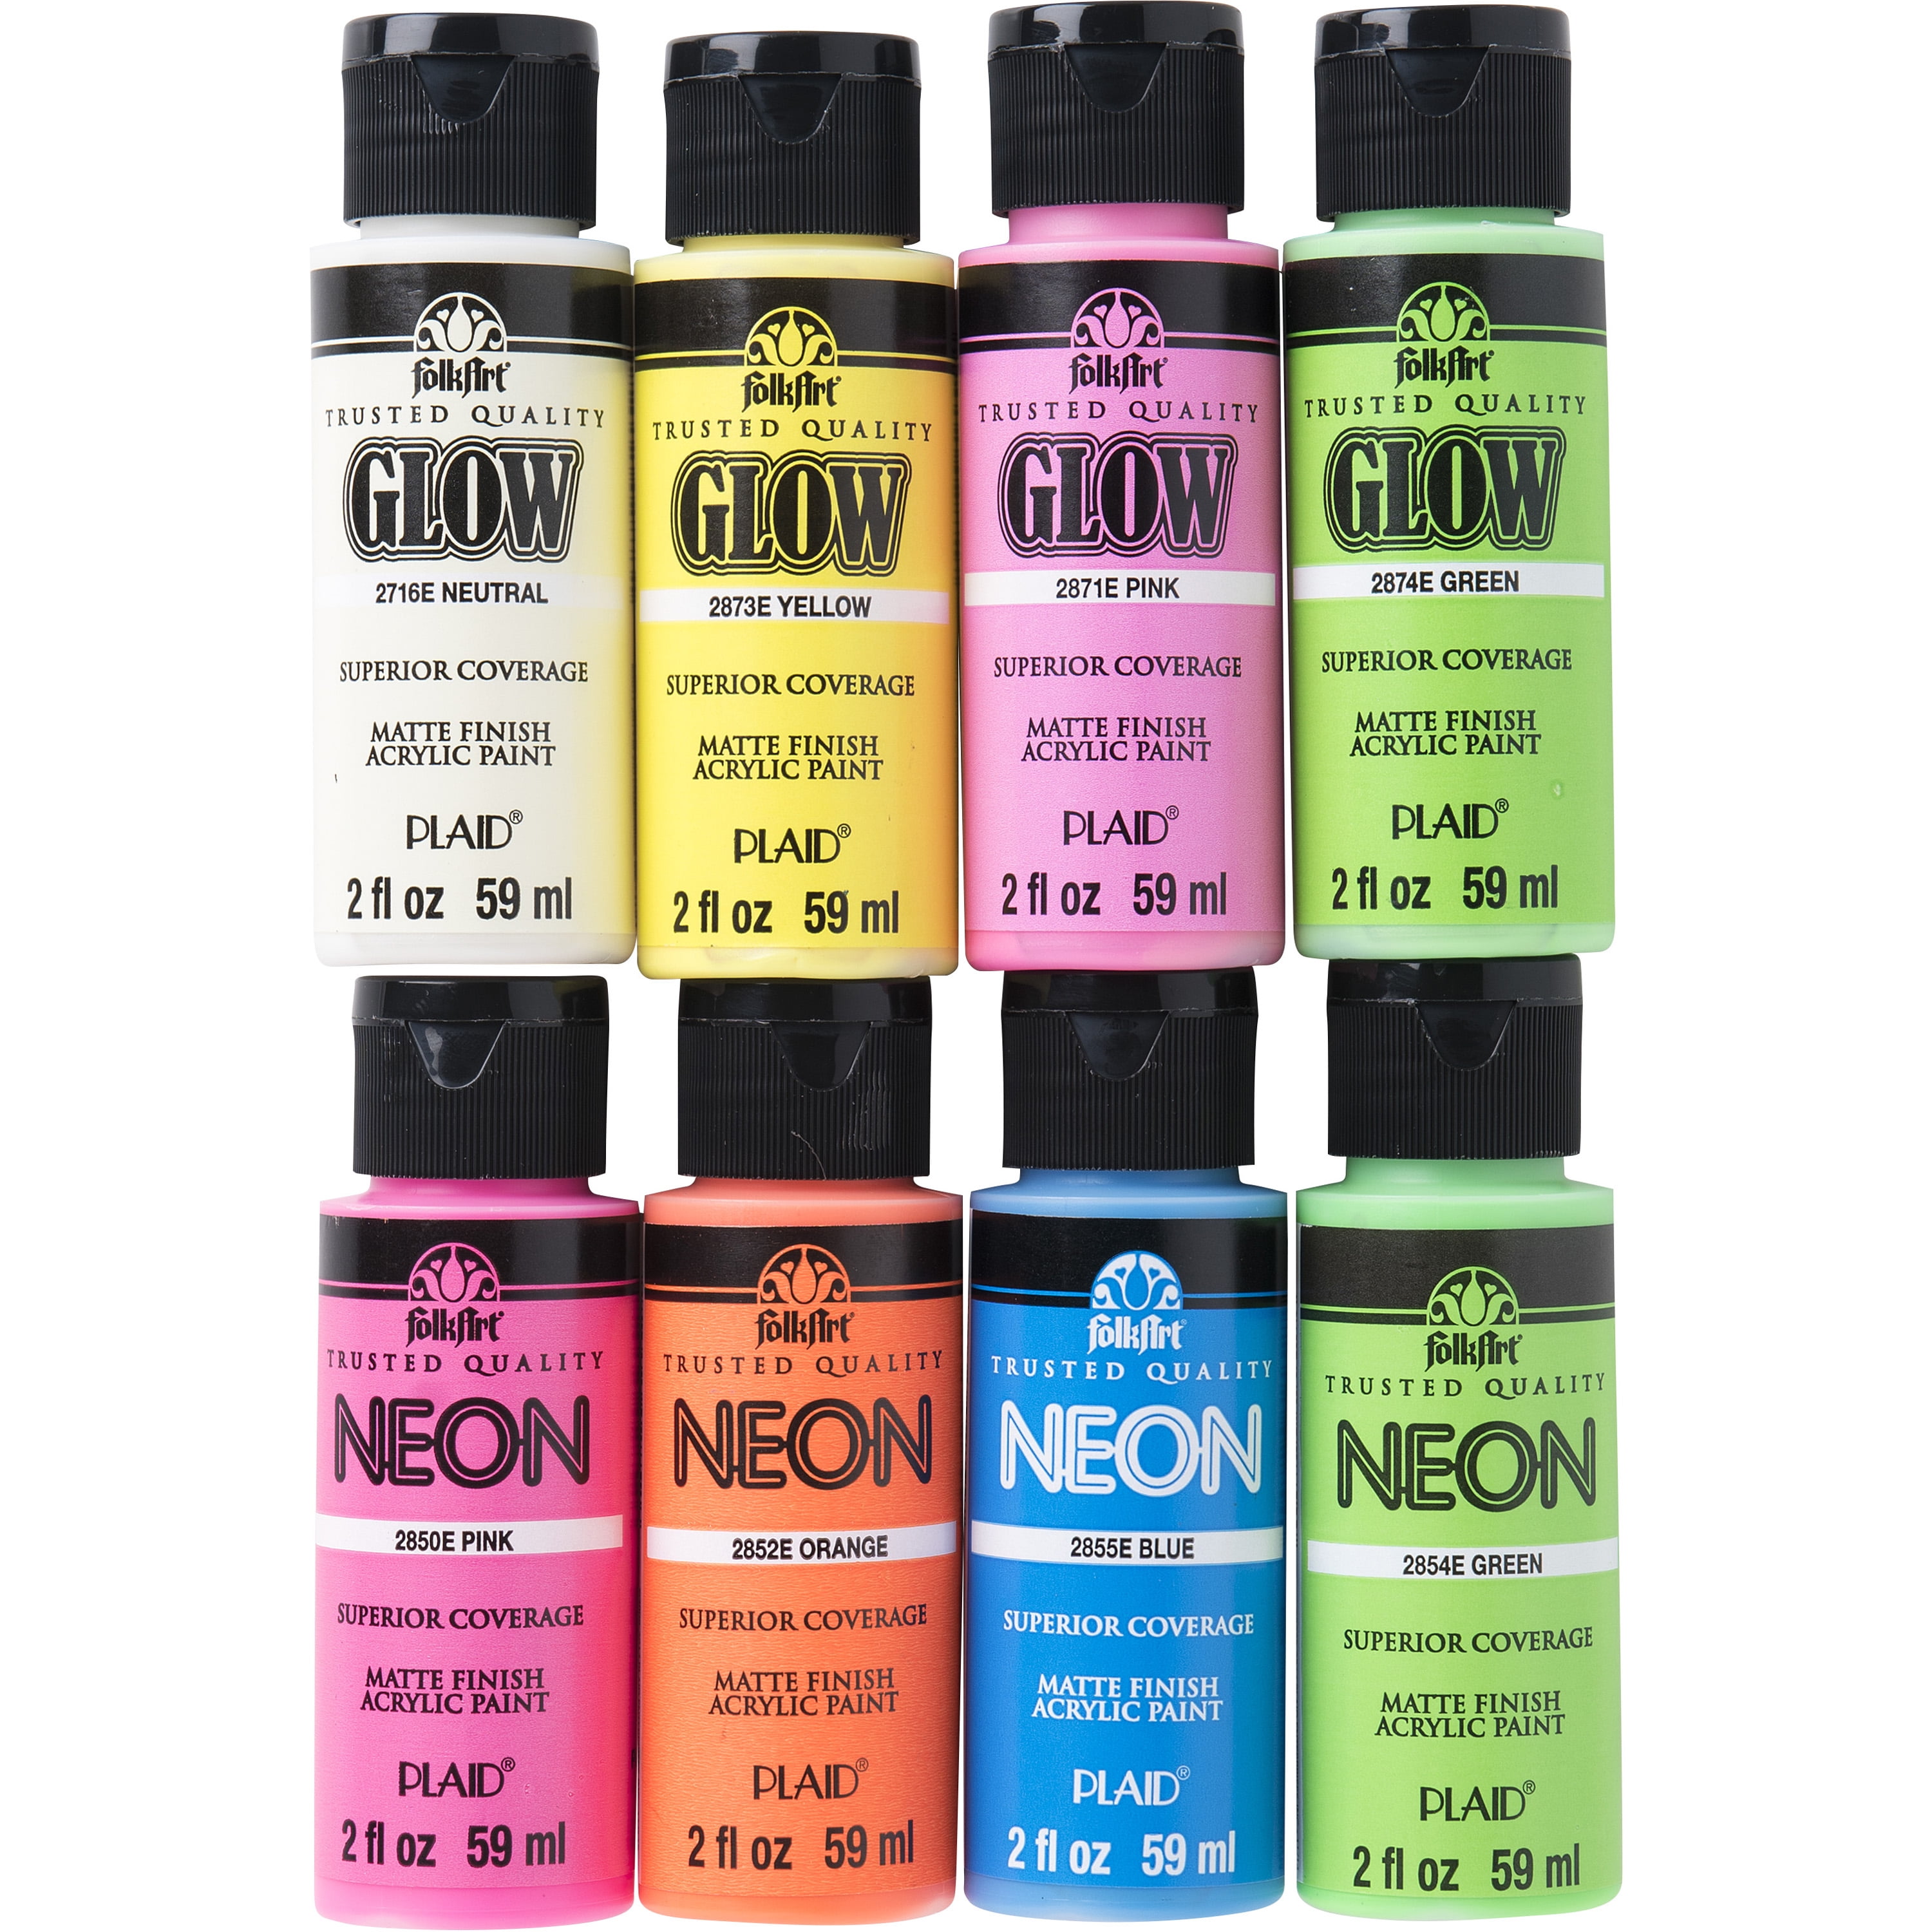 Art 'n Glow 1 Ounce Glow in The Dark Acrylic Paint - Variety of Color options Available, Size: 1 Fluid Ounce, Yellow